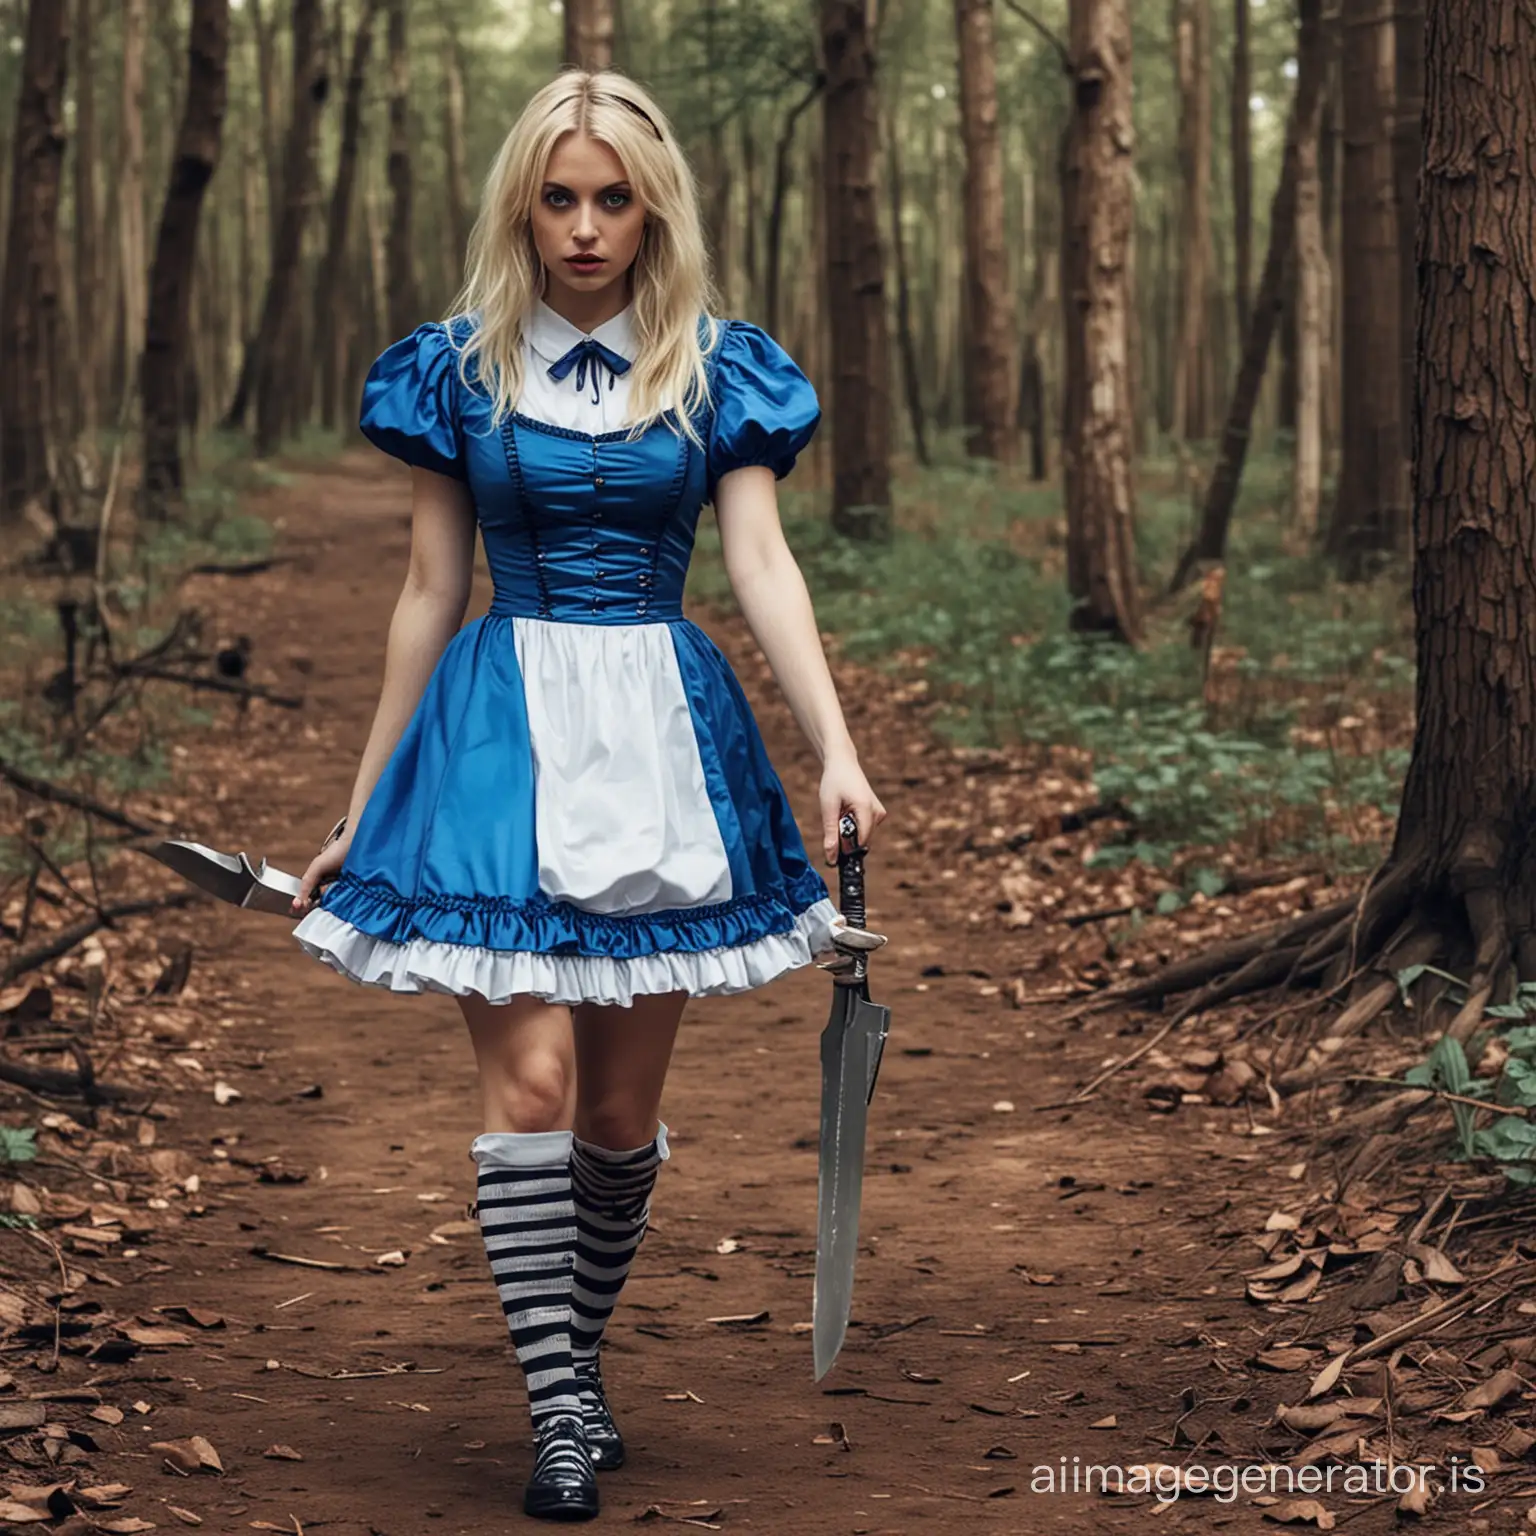 Blonde-Alice-in-Wonderland-with-Striped-Stockings-in-Forest-with-Knife